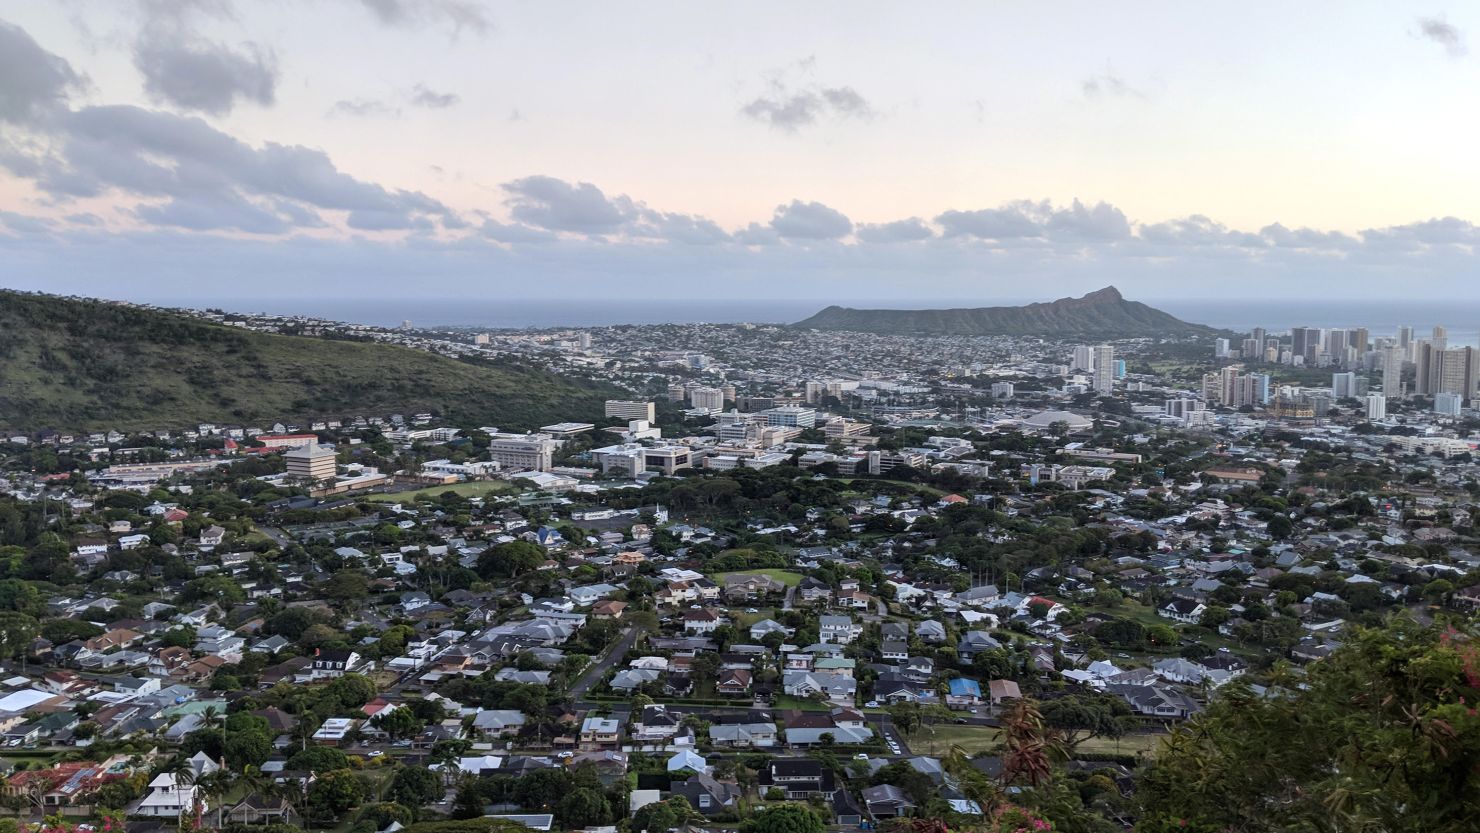 Diamondhead and the city of Honolulu, Kaimuki, Kahala, and oceanscape on Oahu on a nice day at dusk viewed from high in the mountains with tall trees